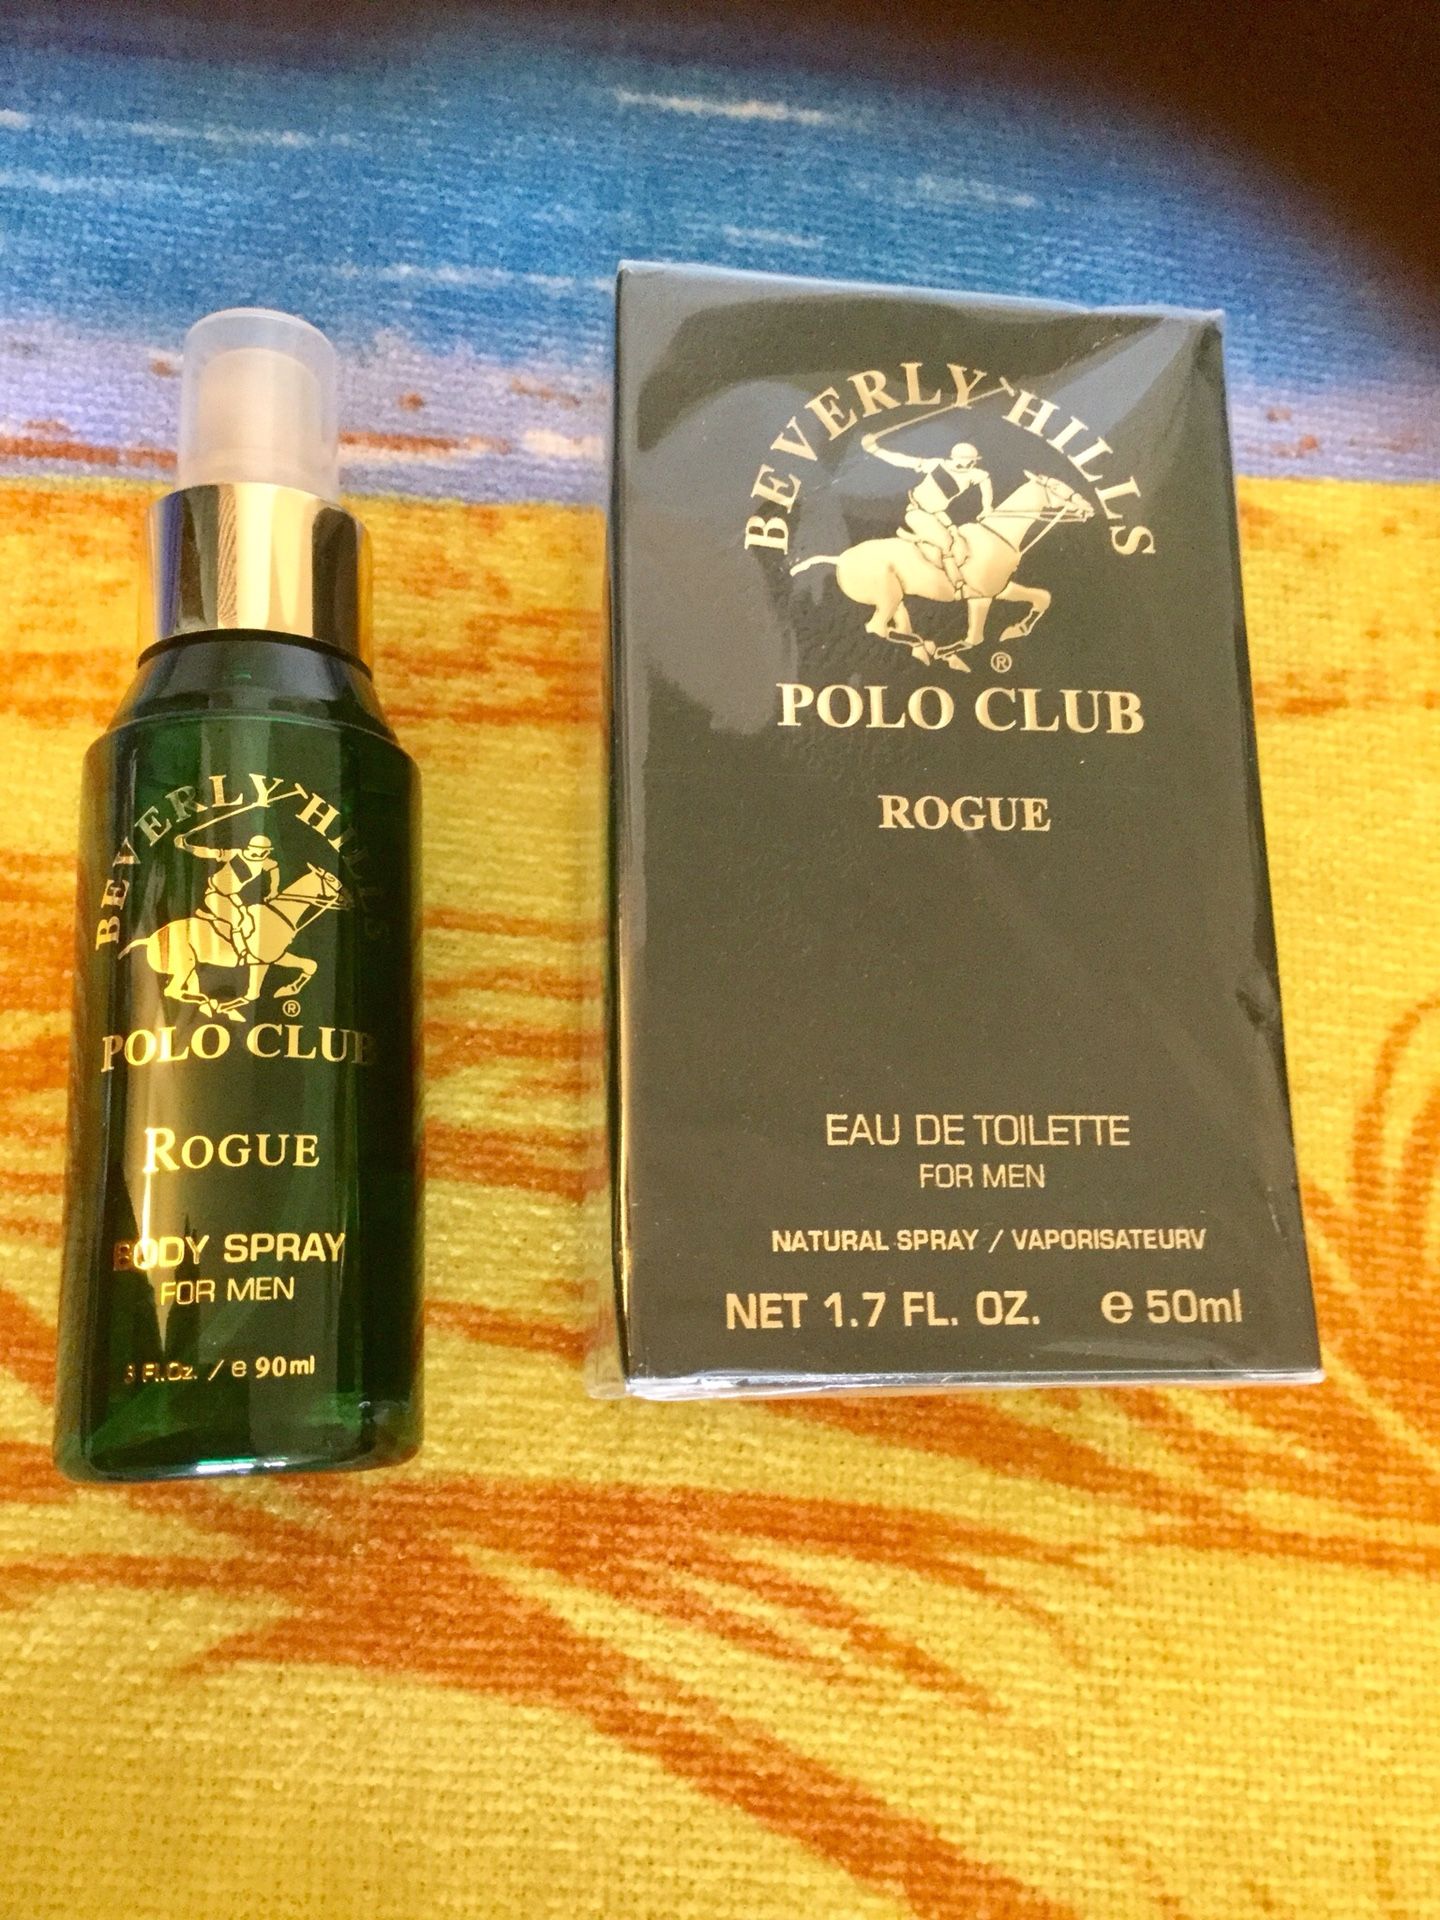 POLO CLUB 🐎🎩 Beverly Hills Men cologne - perfume & Polo club body Spray / NEW selling together for $25